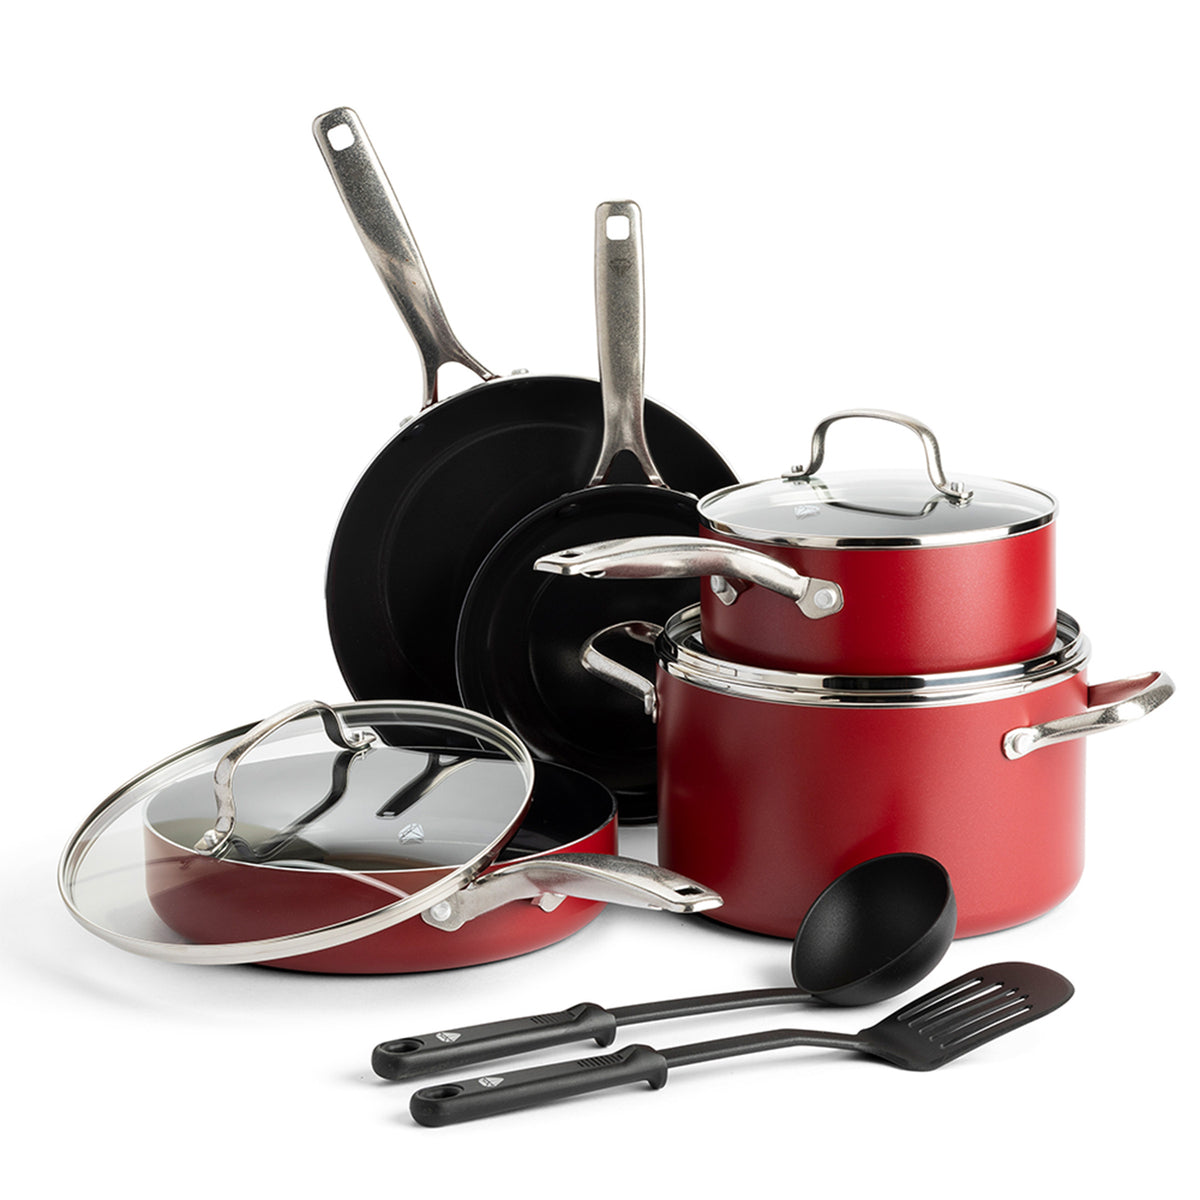 Healthy Living 10pc. Non-Stick Ceramic Cookware Set Red